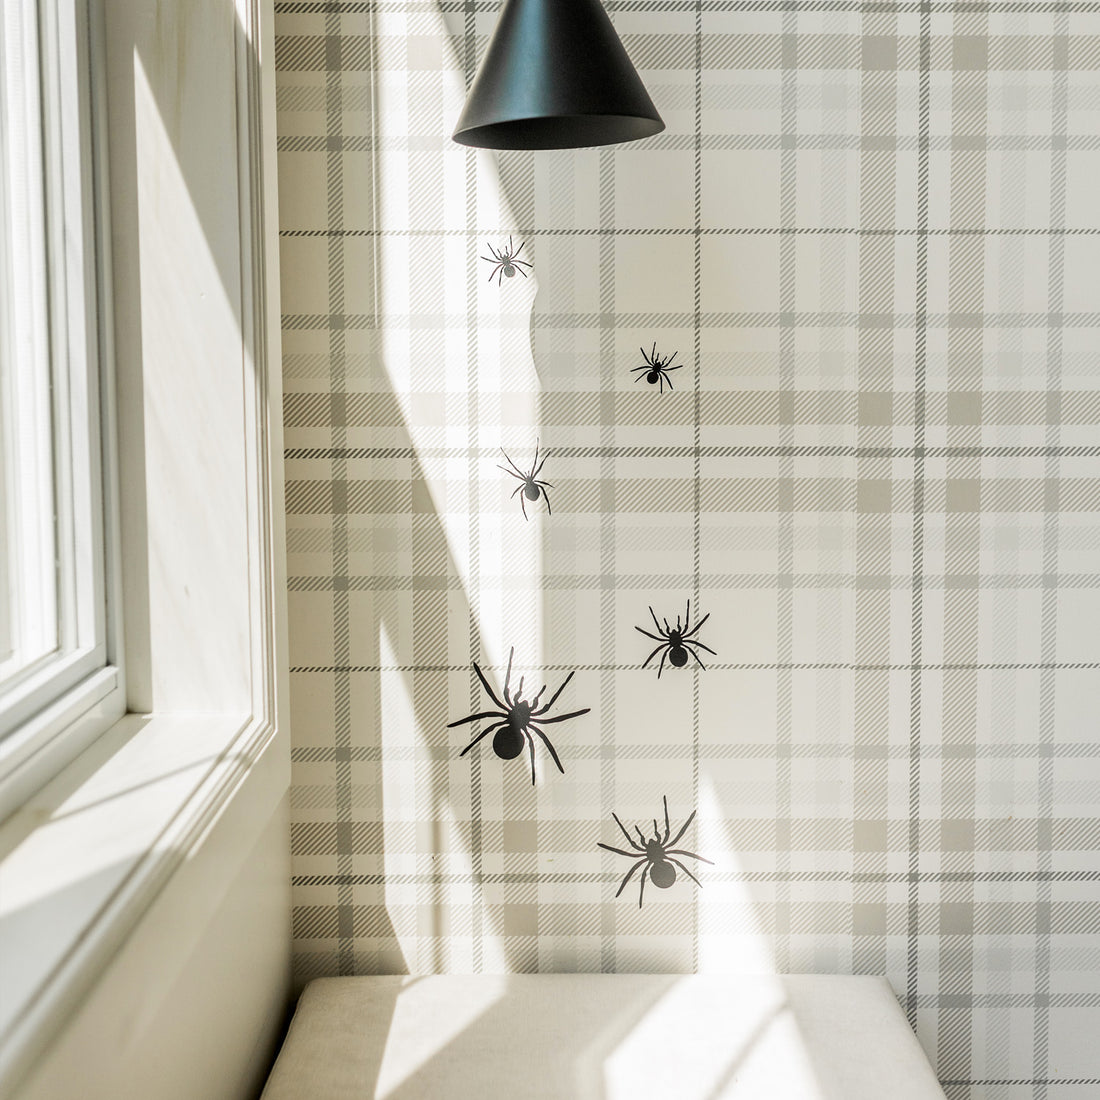 Wall Decals Spiders